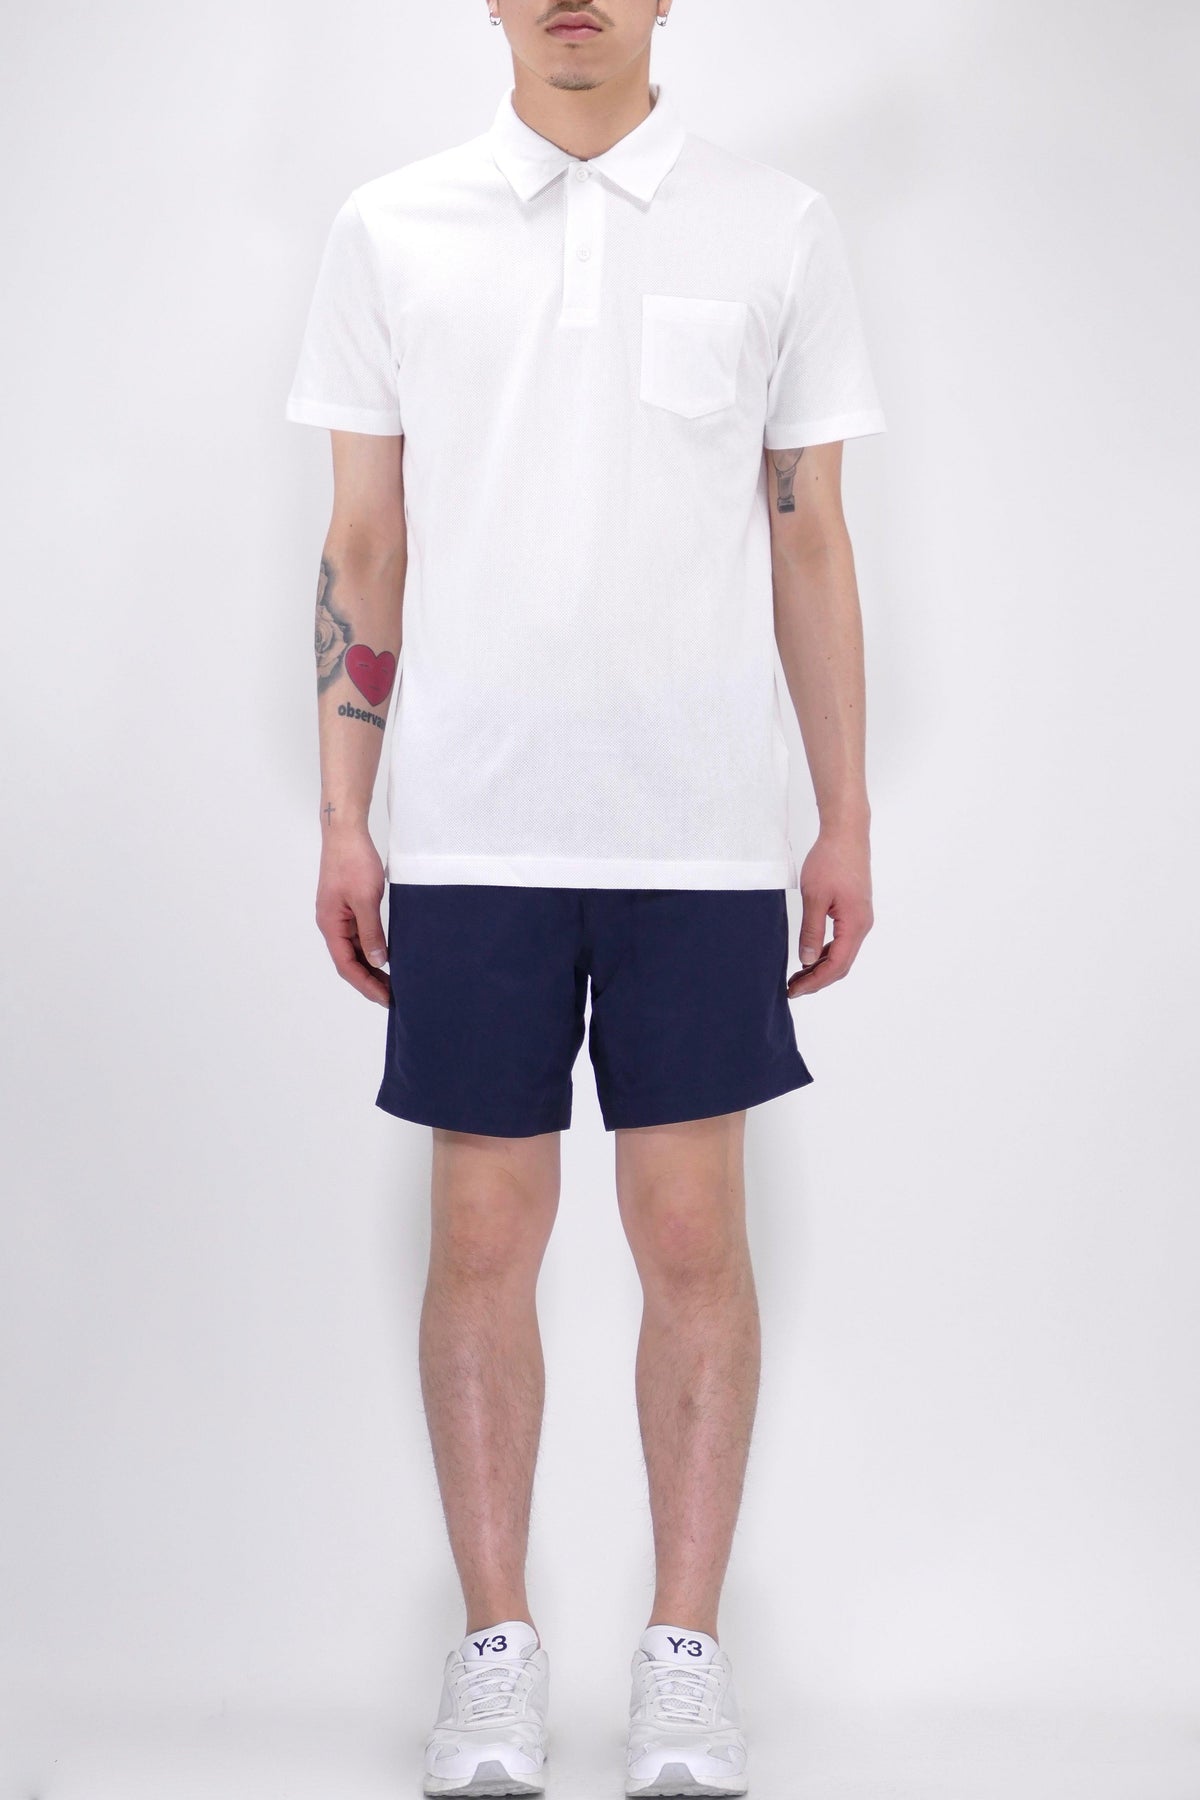 Sunspel Riviera Polo - White - Due West